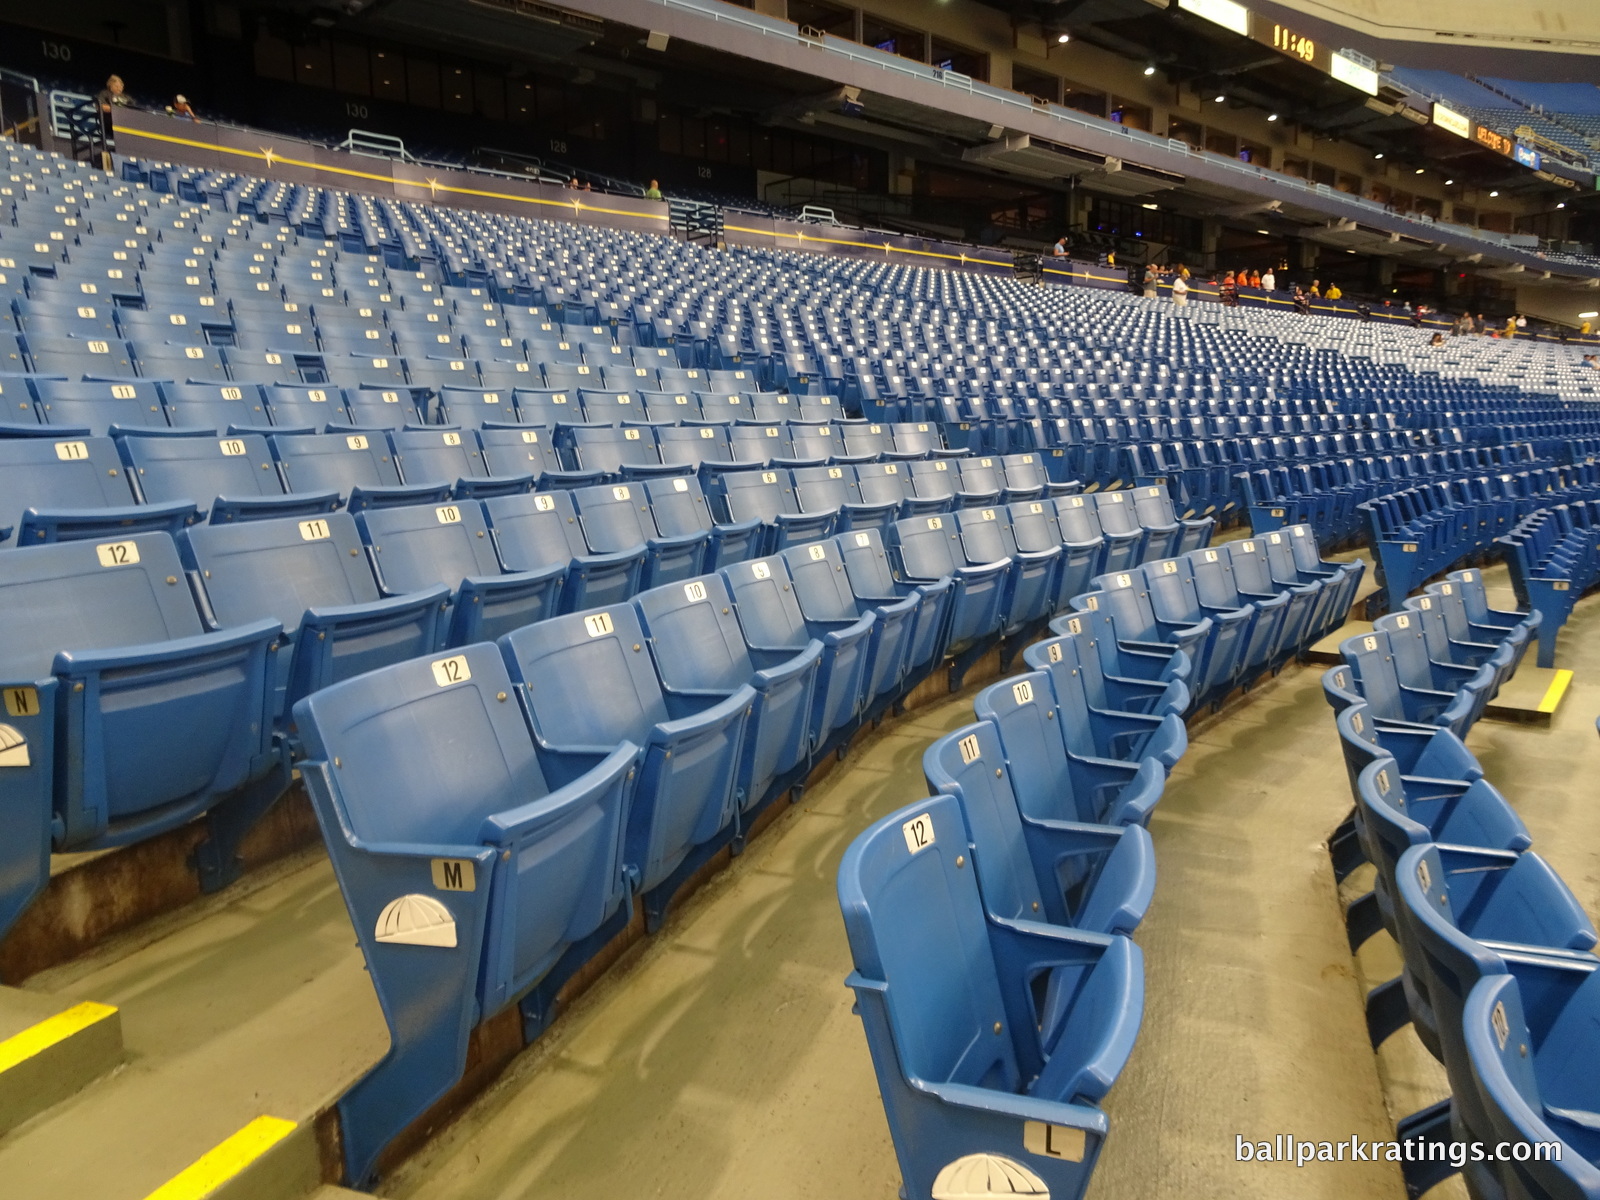 Tropicana Field lacking cupholders